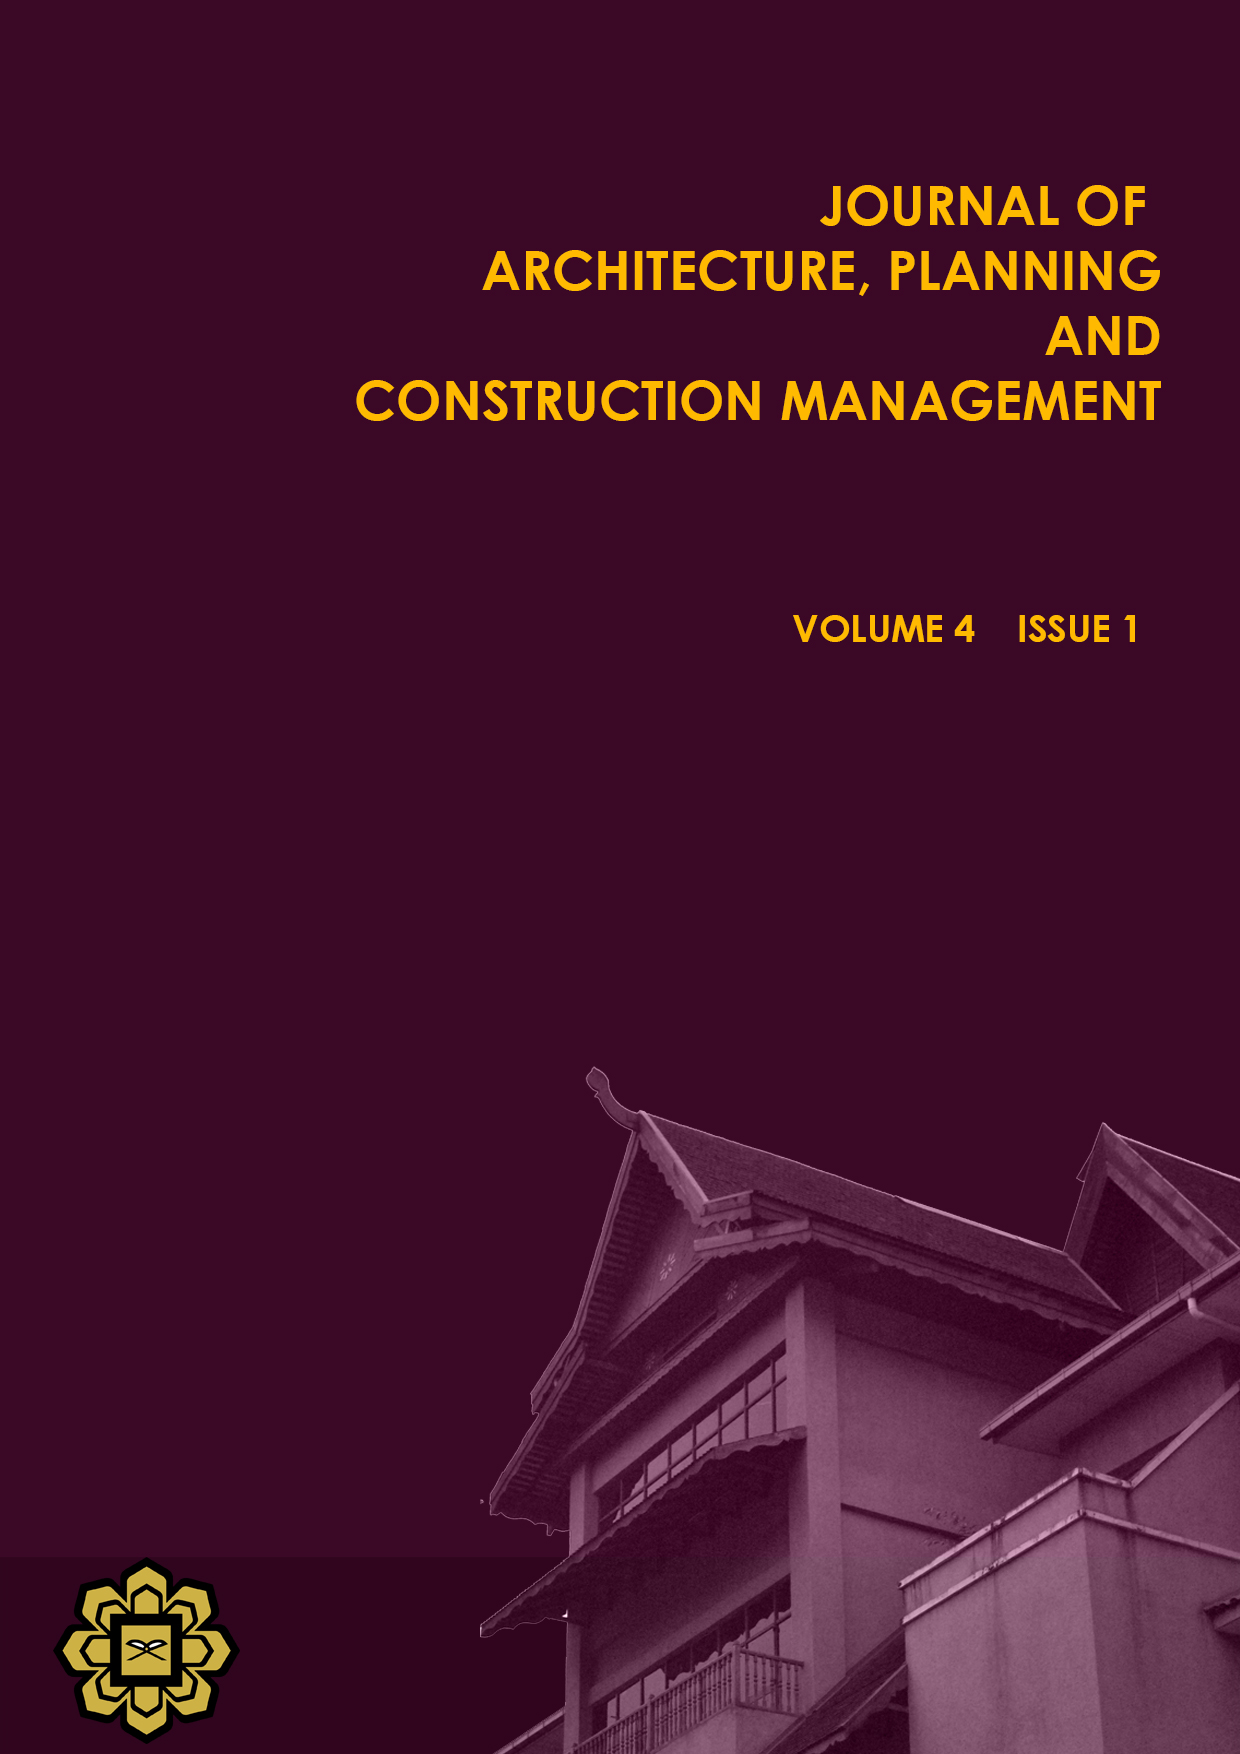 					View Vol. 4 No. 1 (2014): Journal of Architecture, Planning and Construction Management (JAPCM)
				